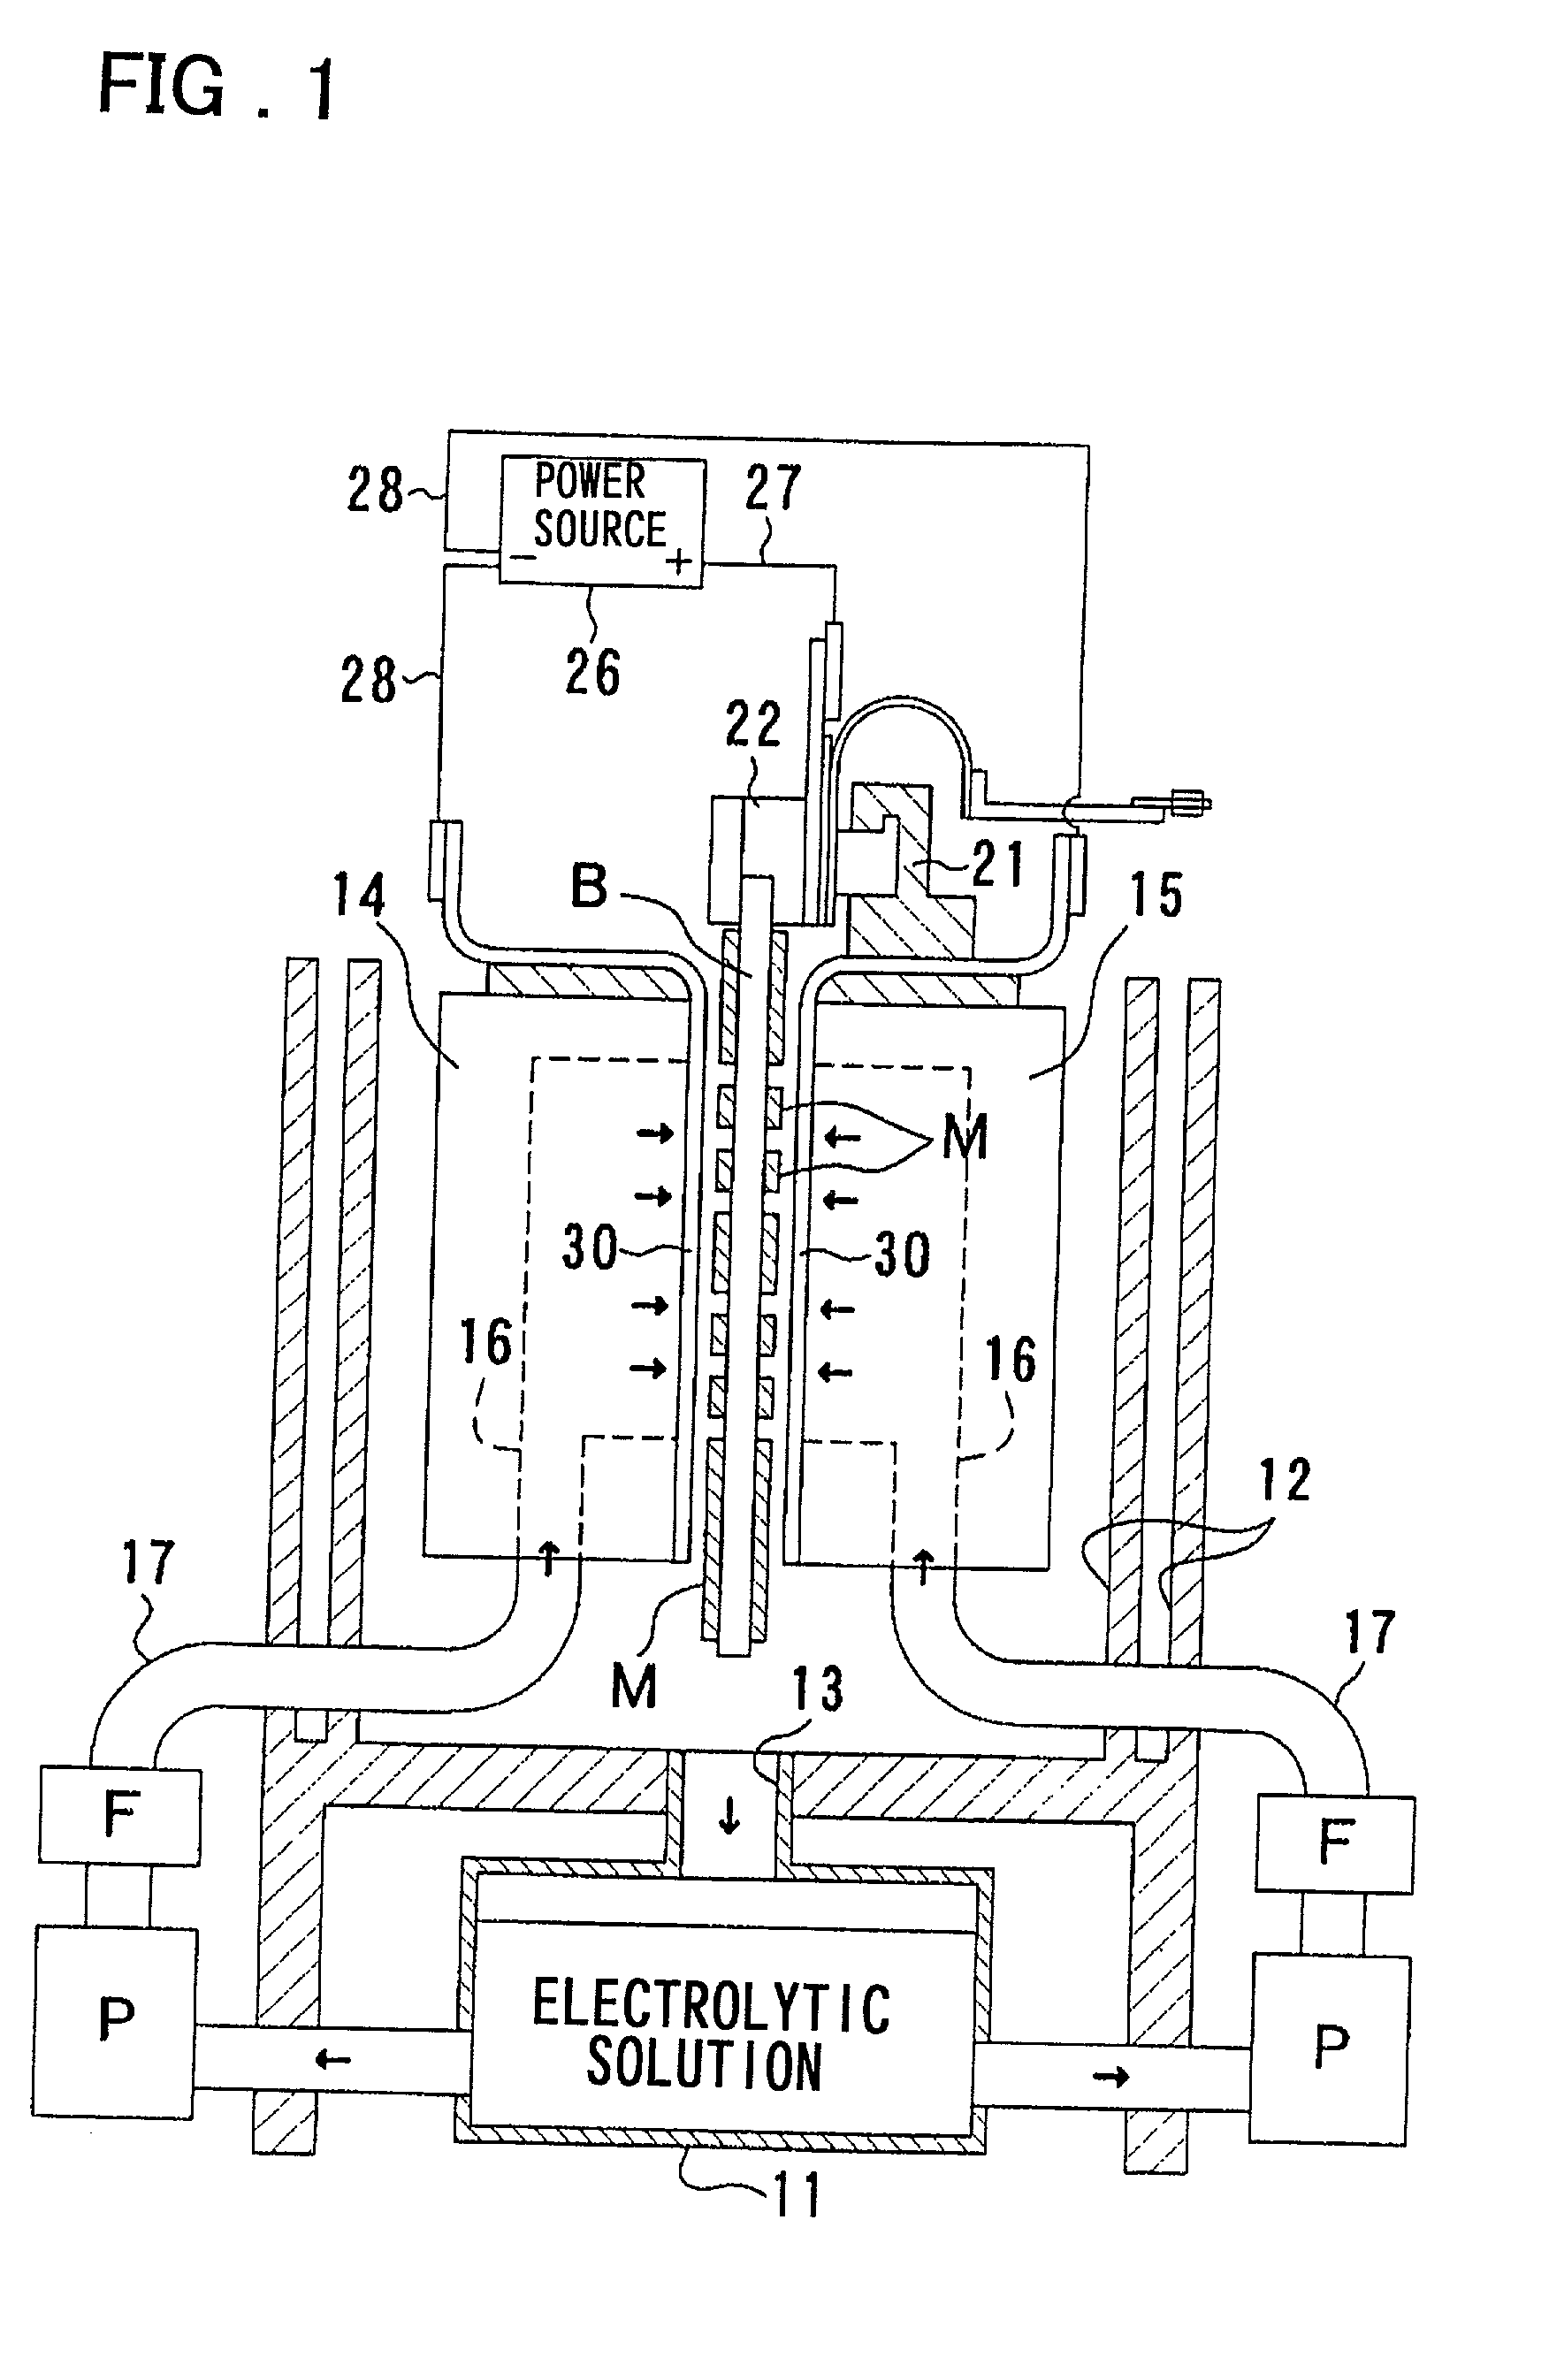 Production of gas separators for use in fuel cells and equipment used therefor